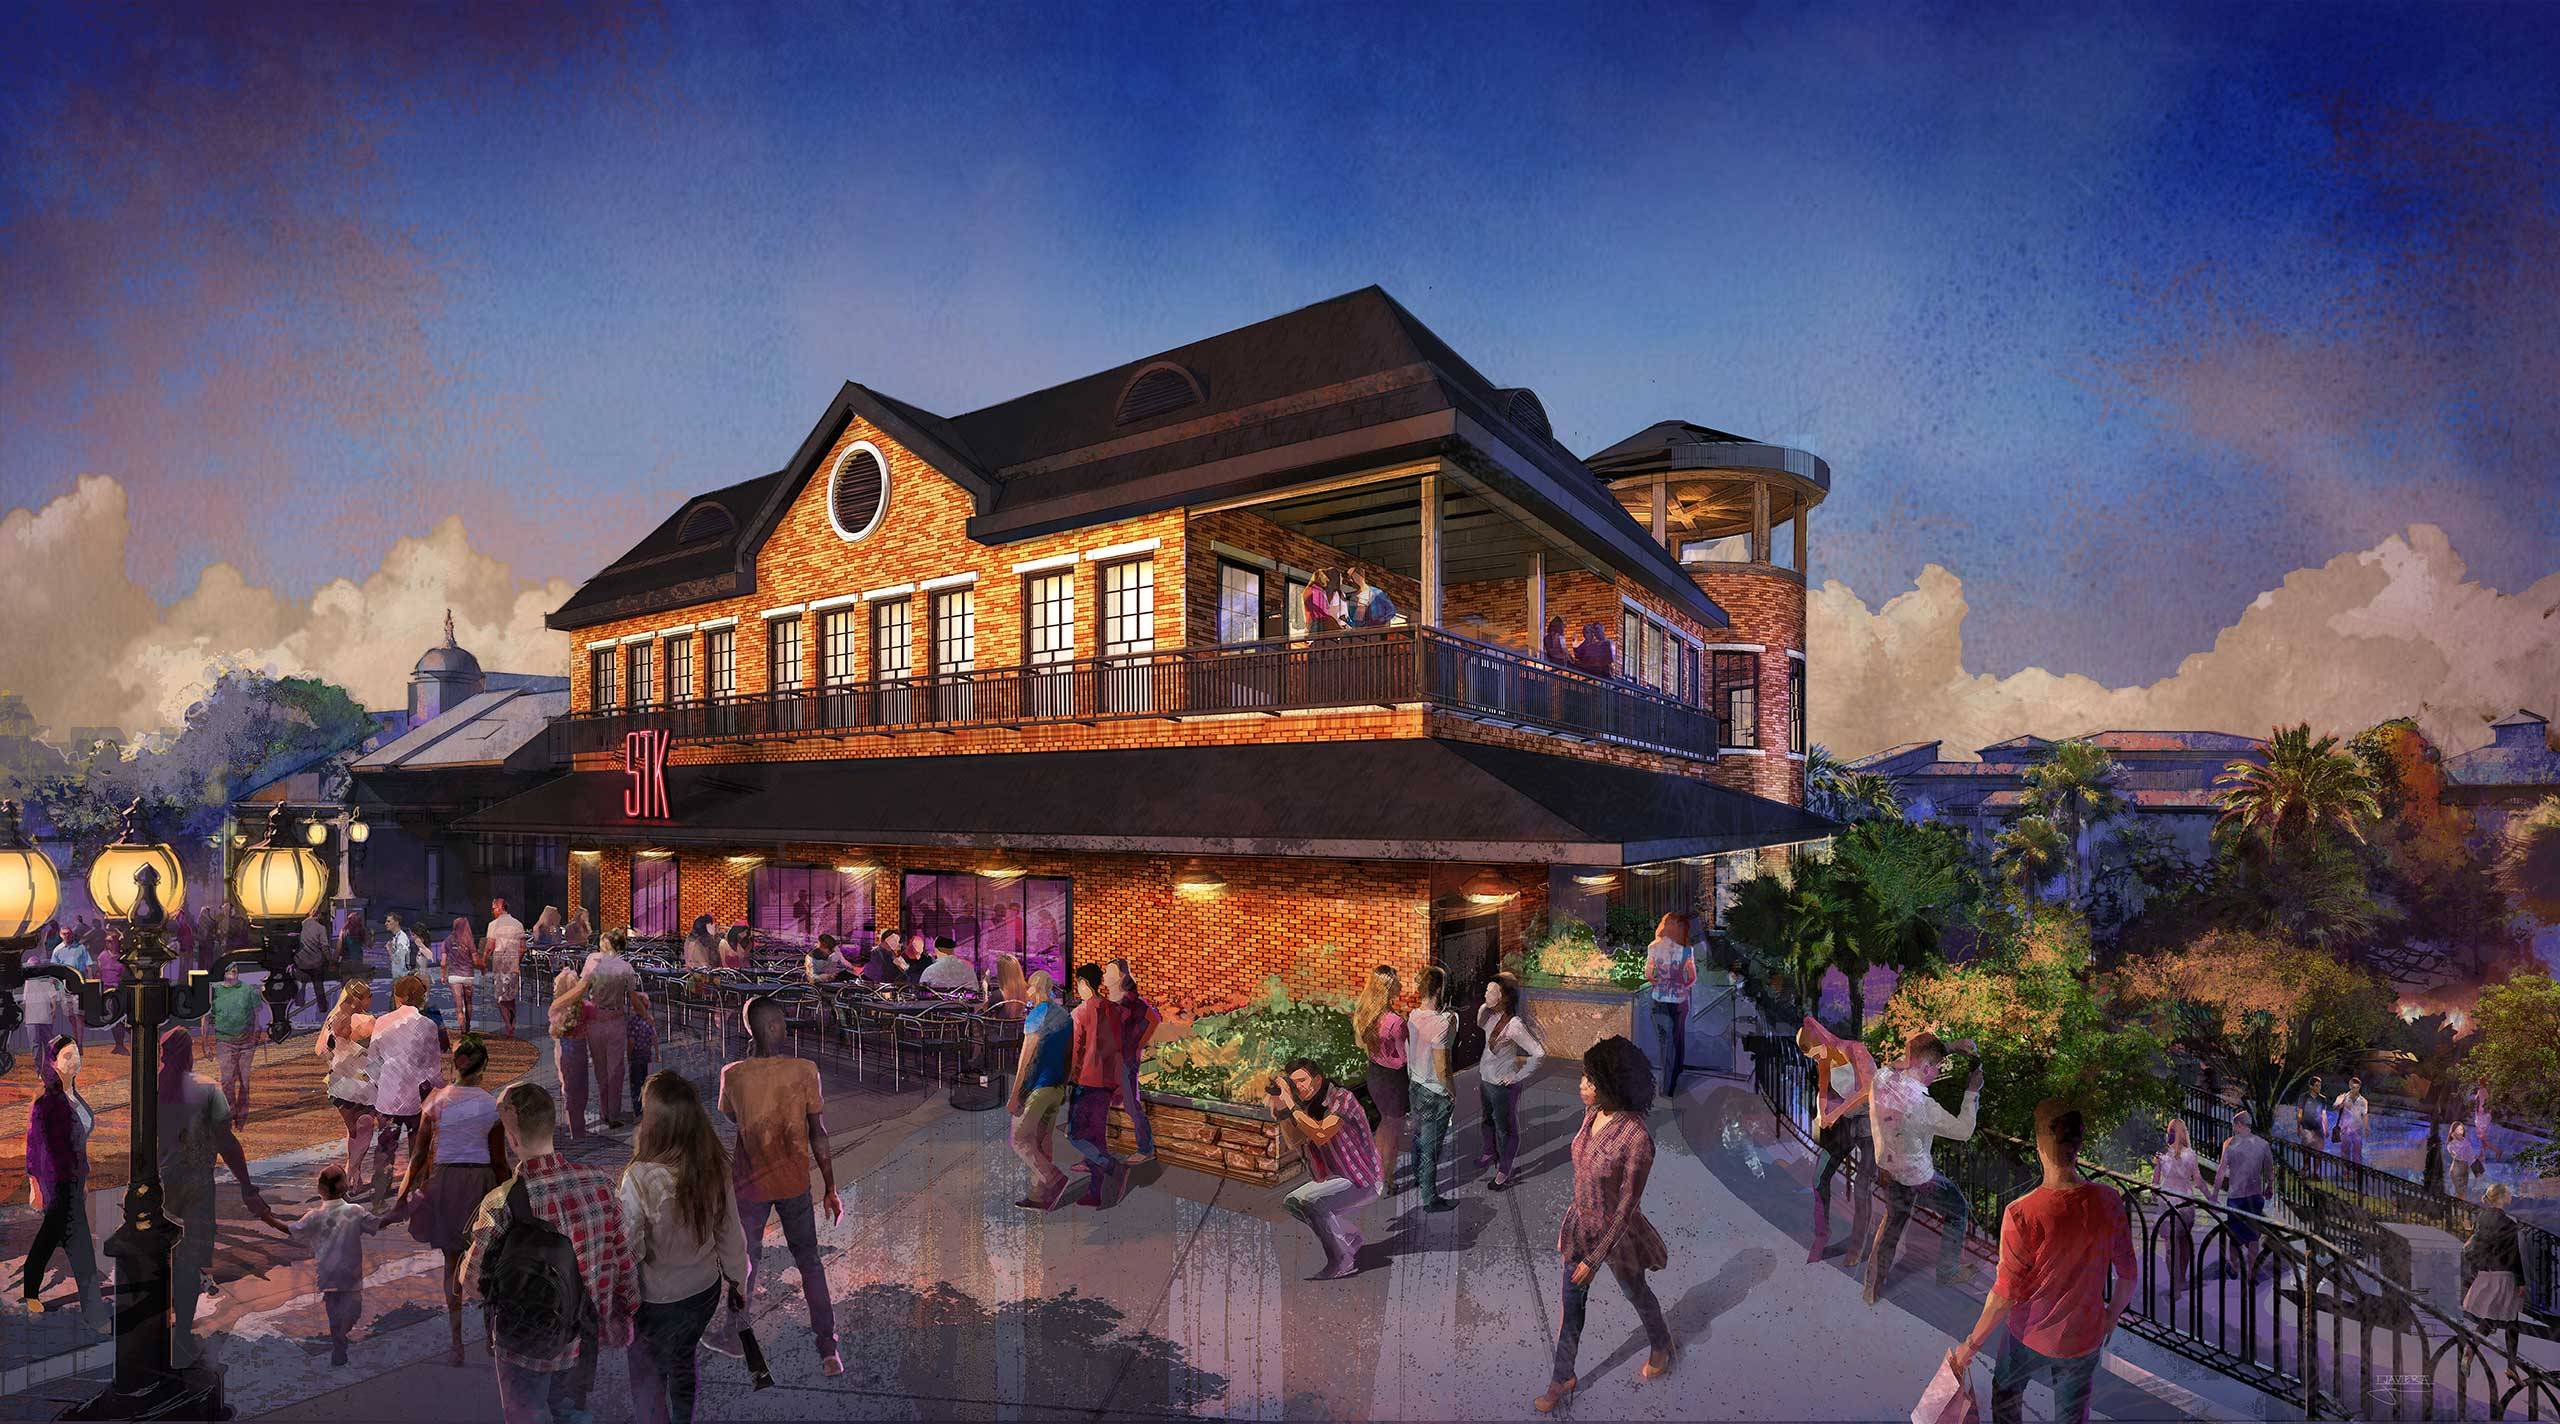 PHOTO - New rendering gives a first look at the new STK Orlando restaurant coming to Disney Springs later this year